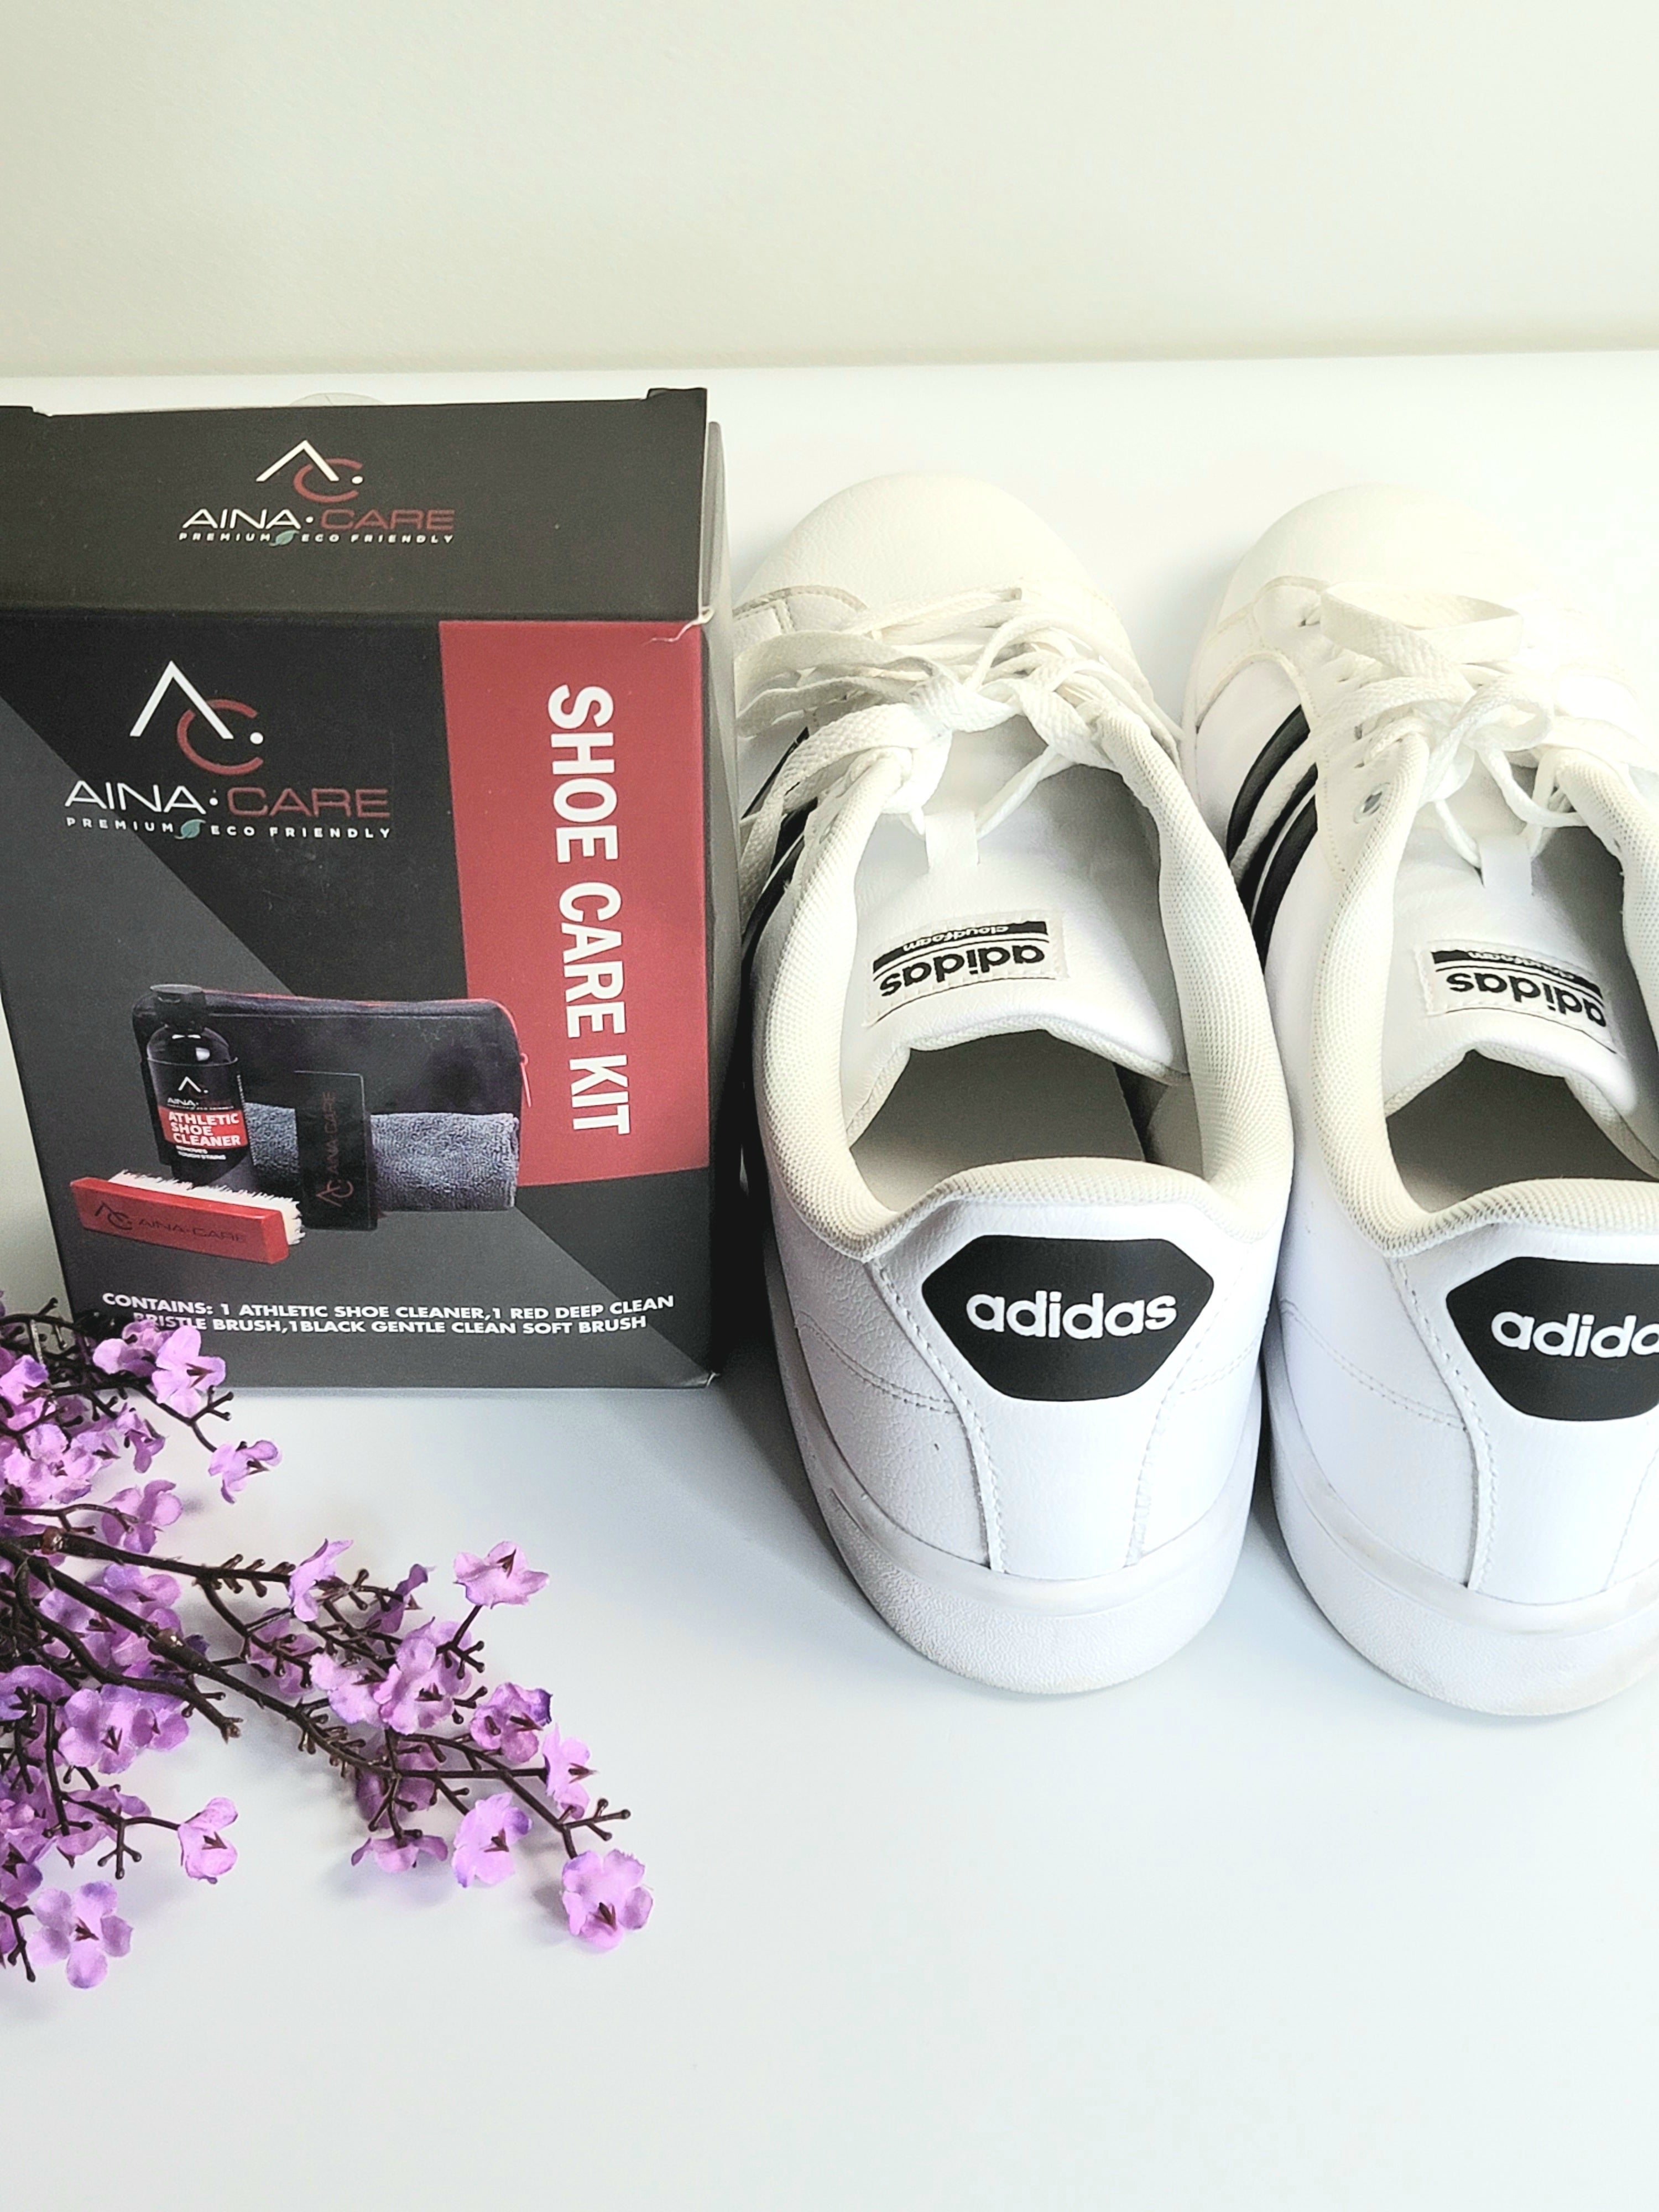 Silver Shoe Care Kit still in it's box next to a pair of clean, white Adidas sneakers and flowers on a white table.